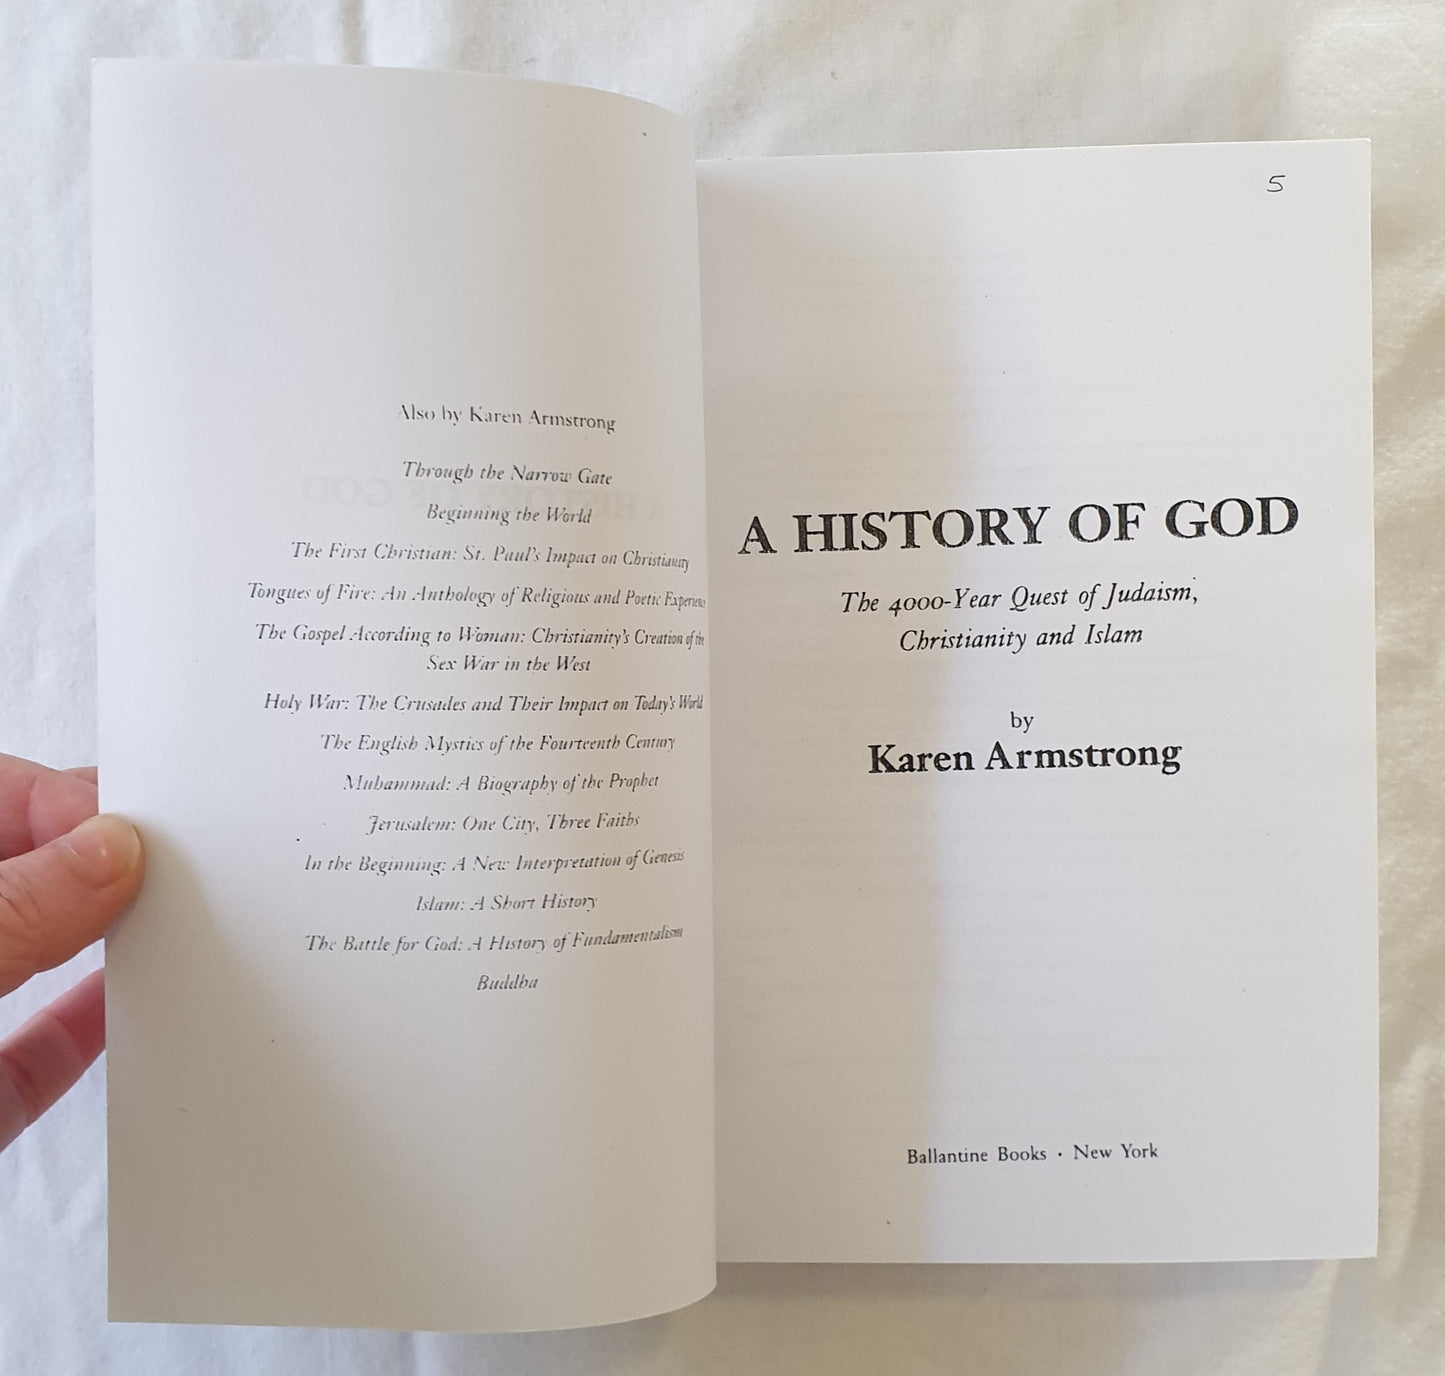 A History of God  The 4000-Year Quest of Judaism, Christianity and Islam  by Karen Armstrong